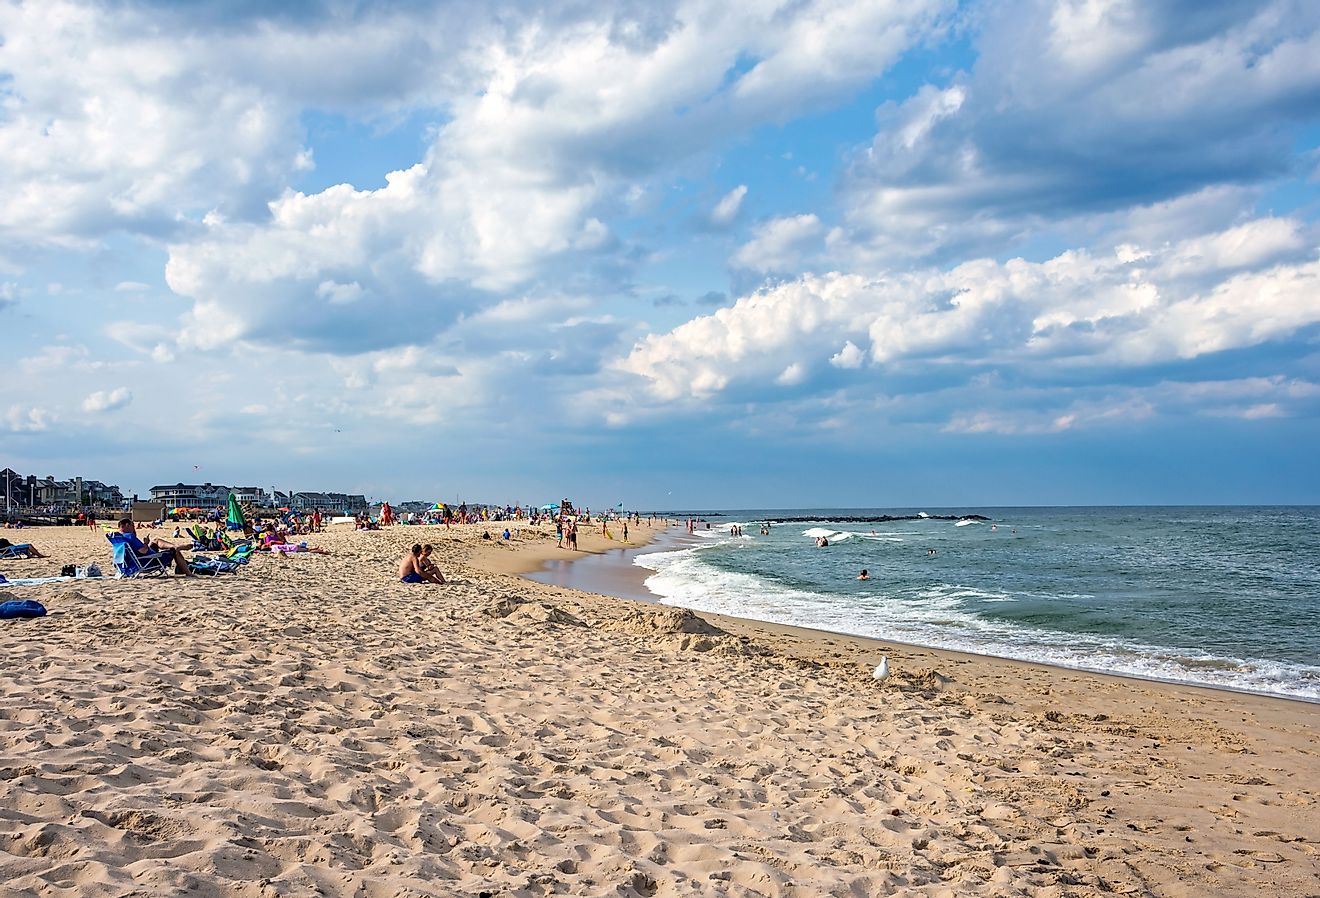 A view of the beach on a late summer afternoon in Spring Lake New Jersey. Image credit Andrew F. Kazmierski via Shutterstock